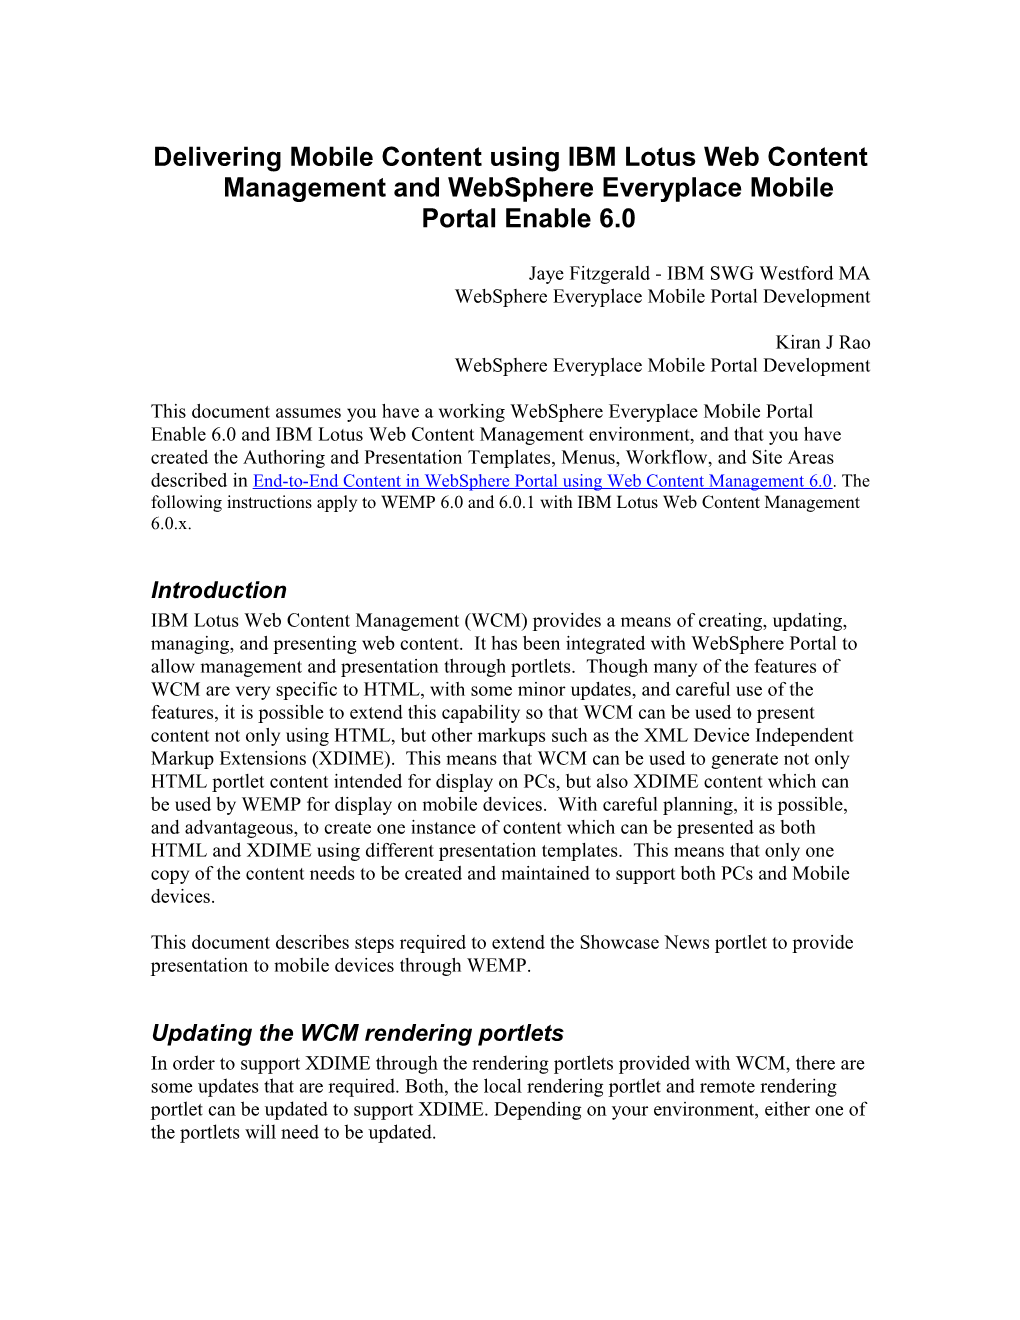 Delivering Mobile Content Using IBM Workplace Web Content Management and Websphere Everyplace